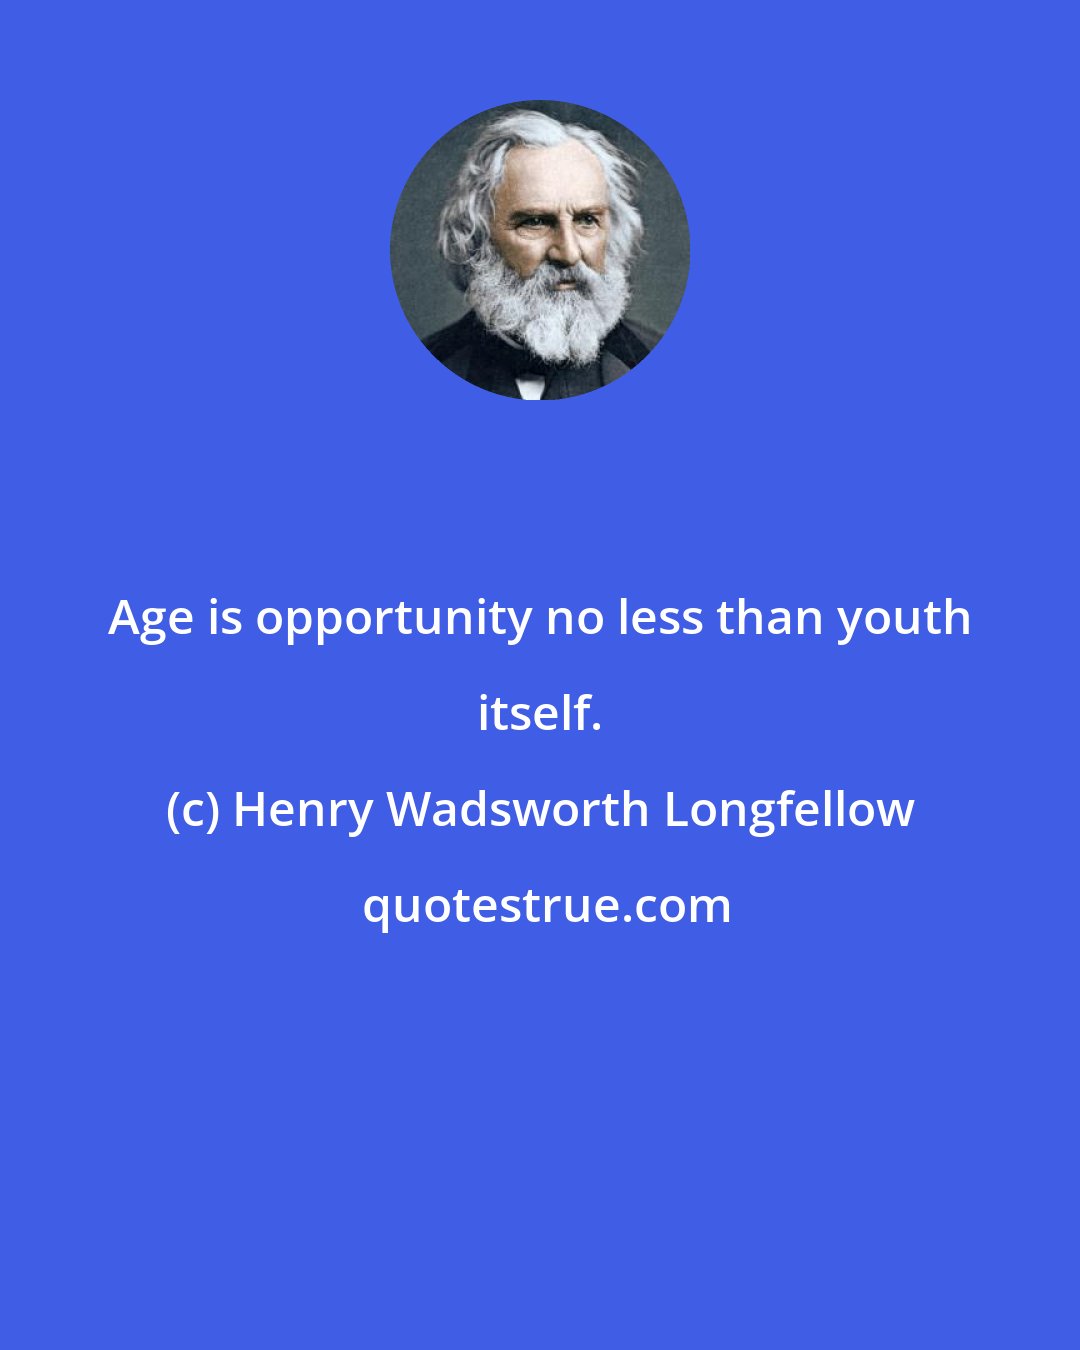 Henry Wadsworth Longfellow: Age is opportunity no less than youth itself.